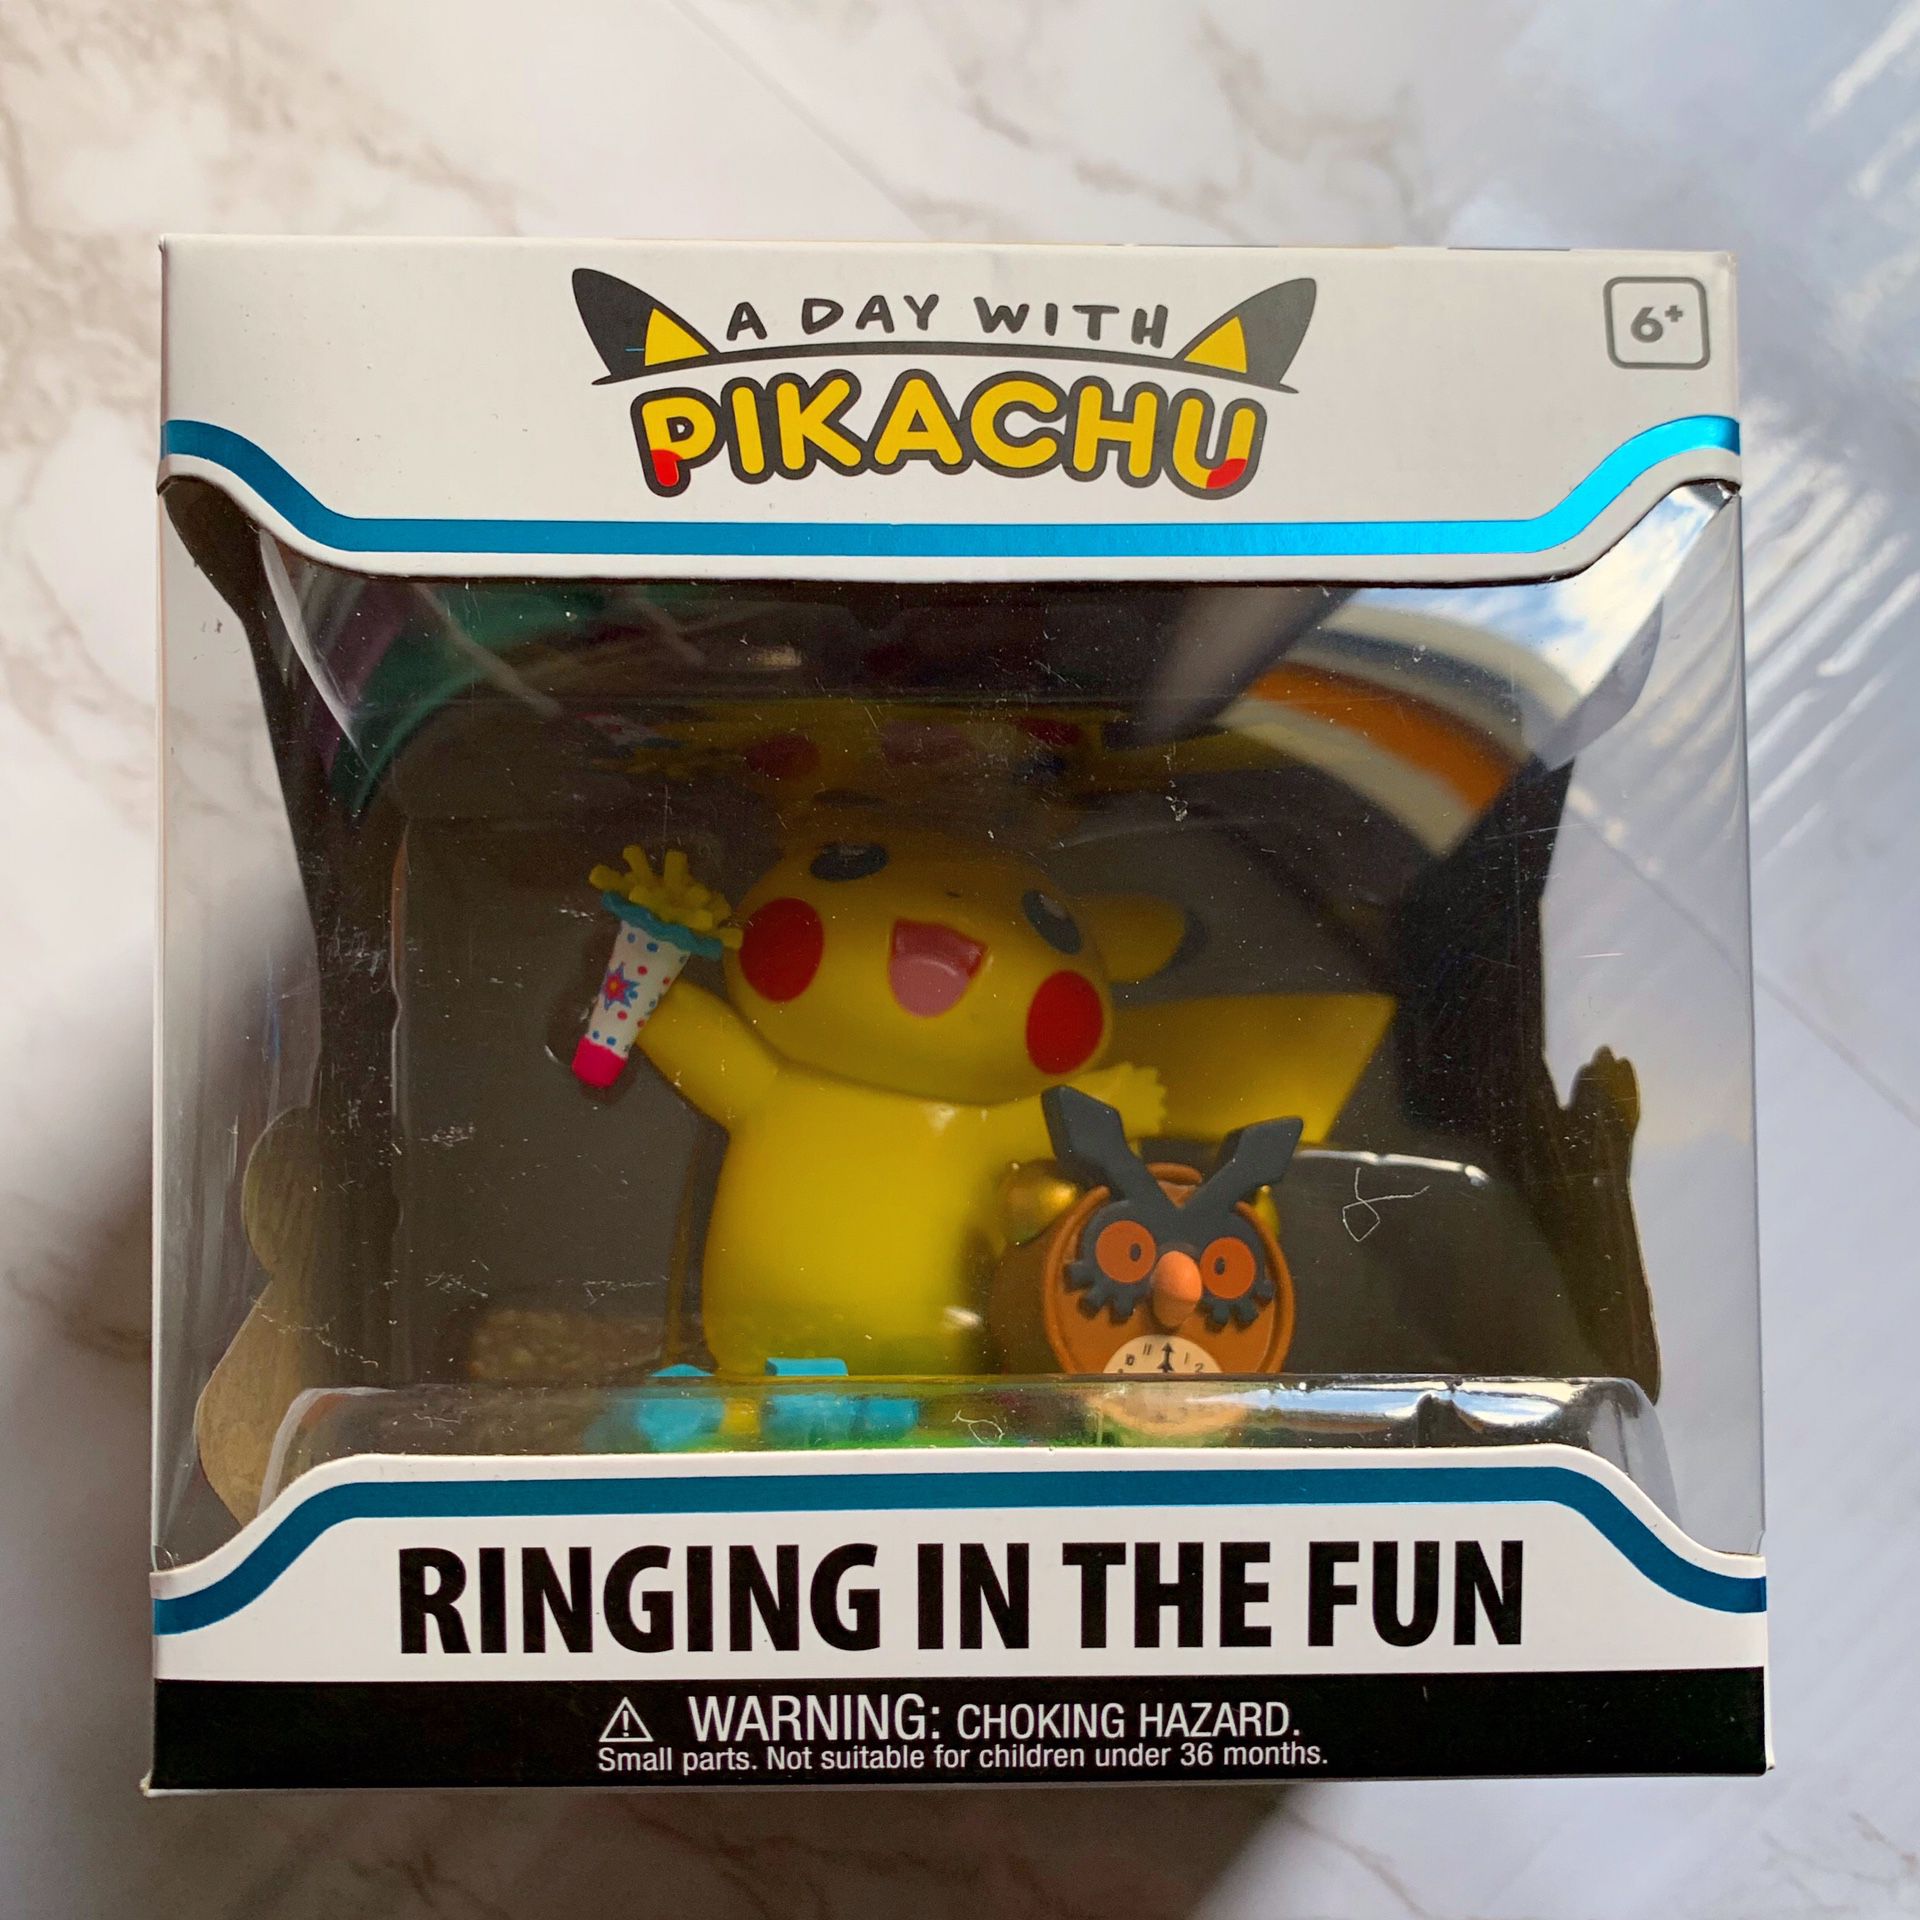 A Day with Pikachu - Ringing in the Fun